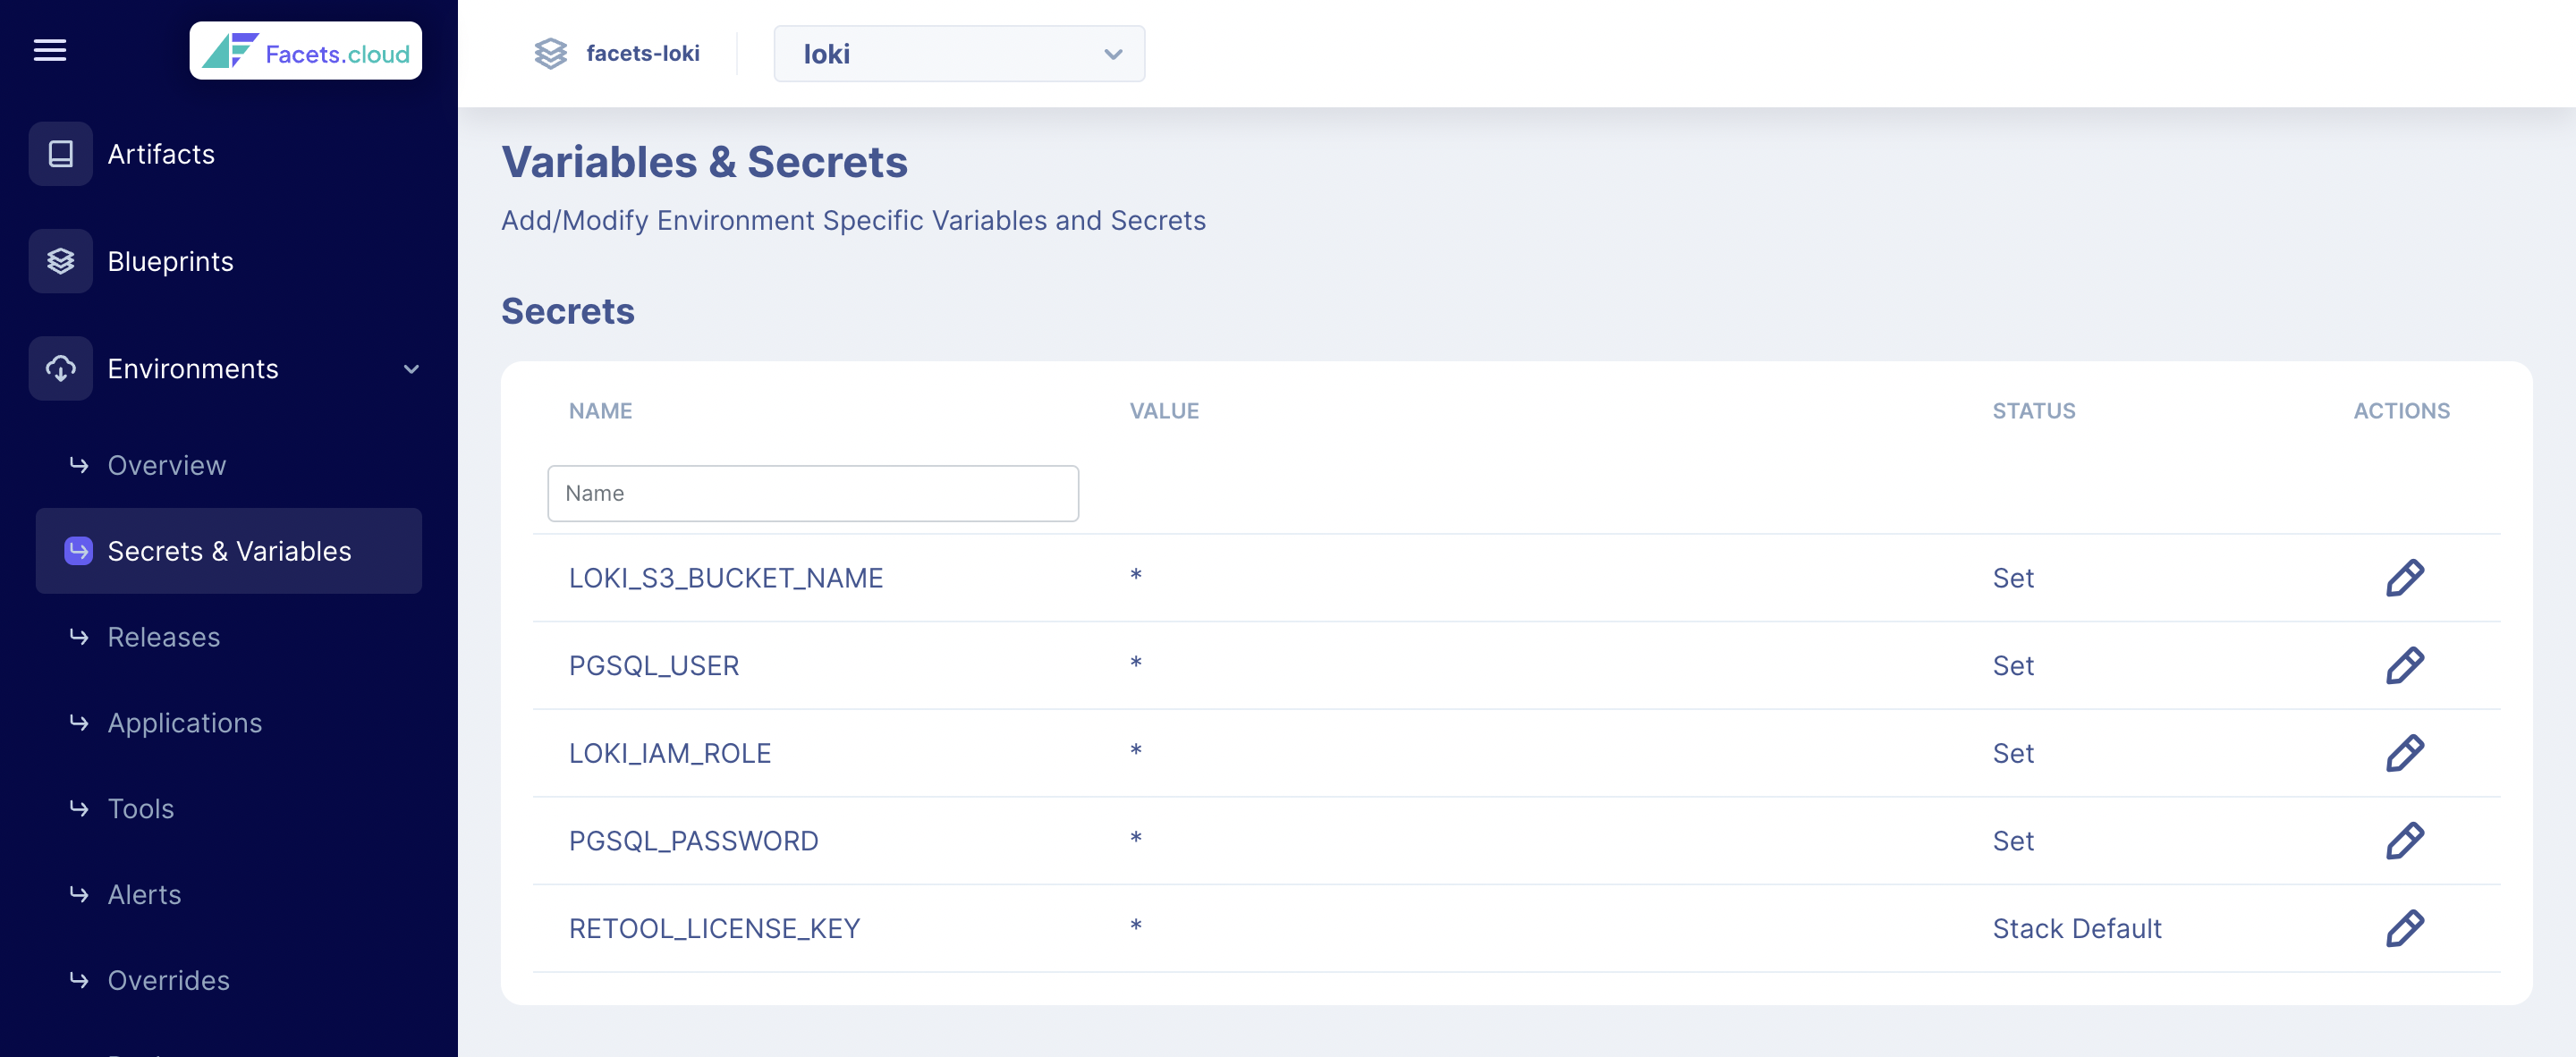 Secrets and Variables screen in Facets UI